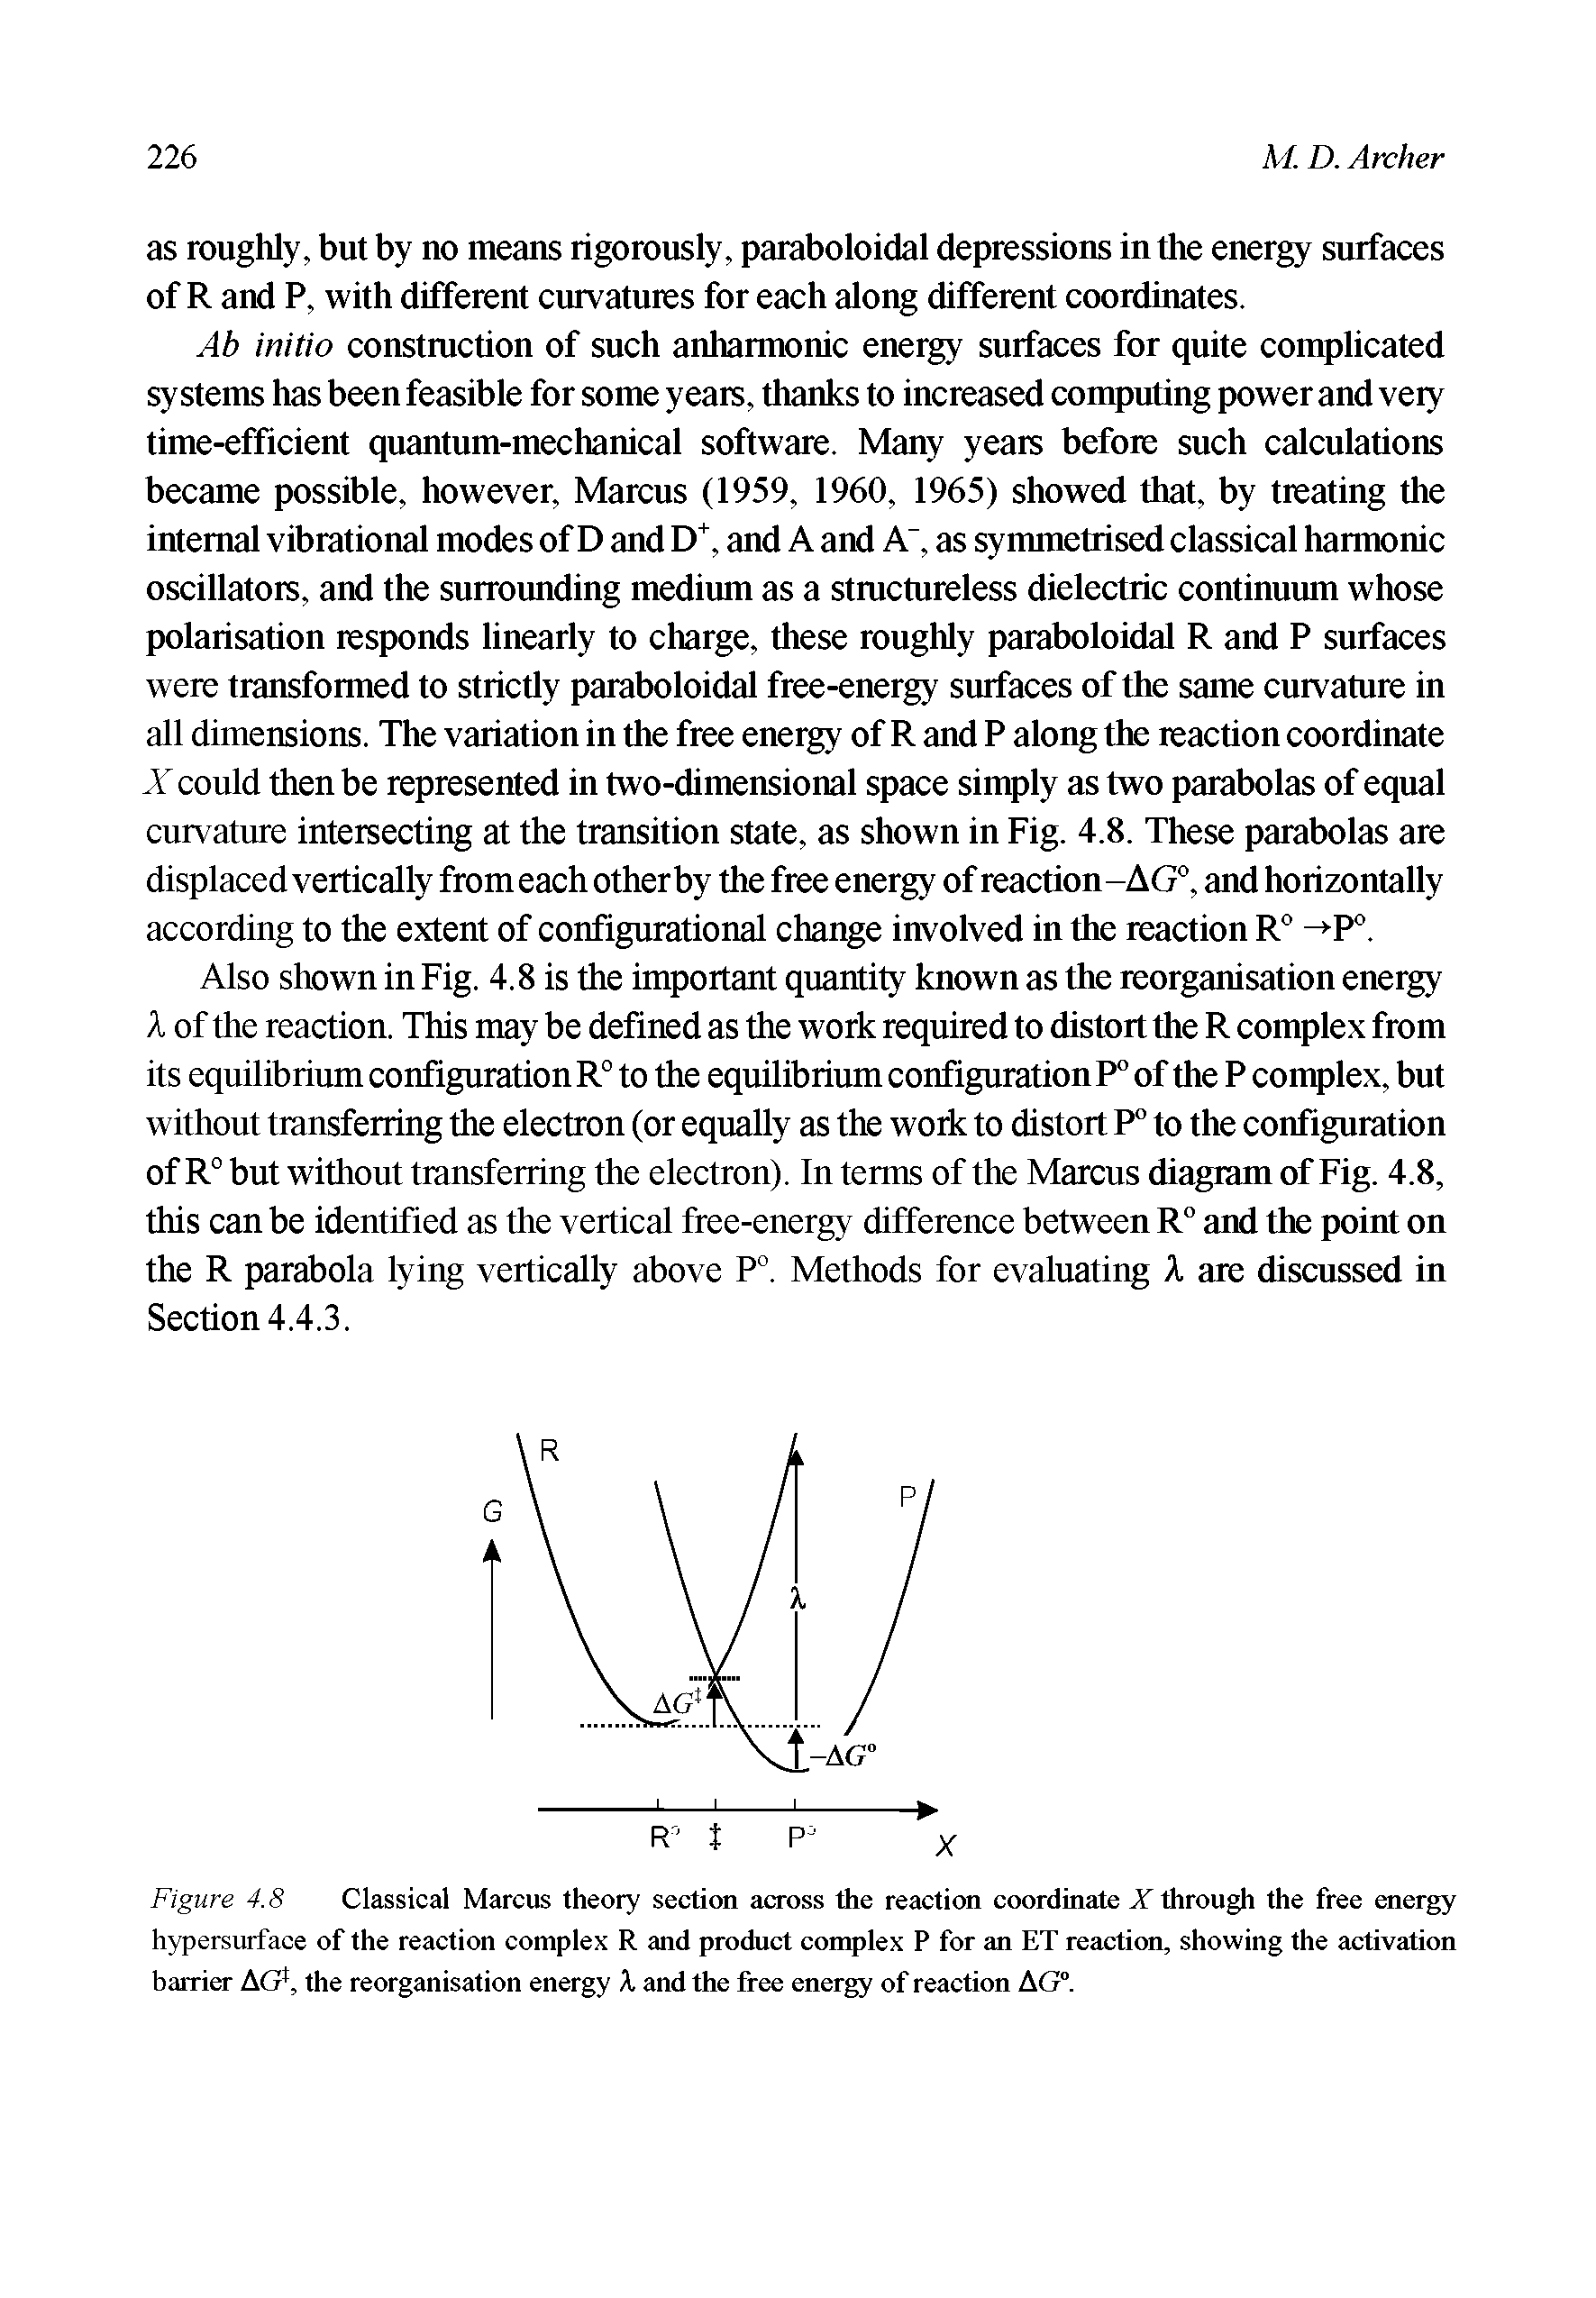 Figure 4.8 Classical Marcus theory section across the reaction coordinate X through the free energy hypersurface of the reaction complex R and product complex P for an ET reaction, showing the activation barrier AG, the reorganisation energy A and the free energy of reaction AG°.